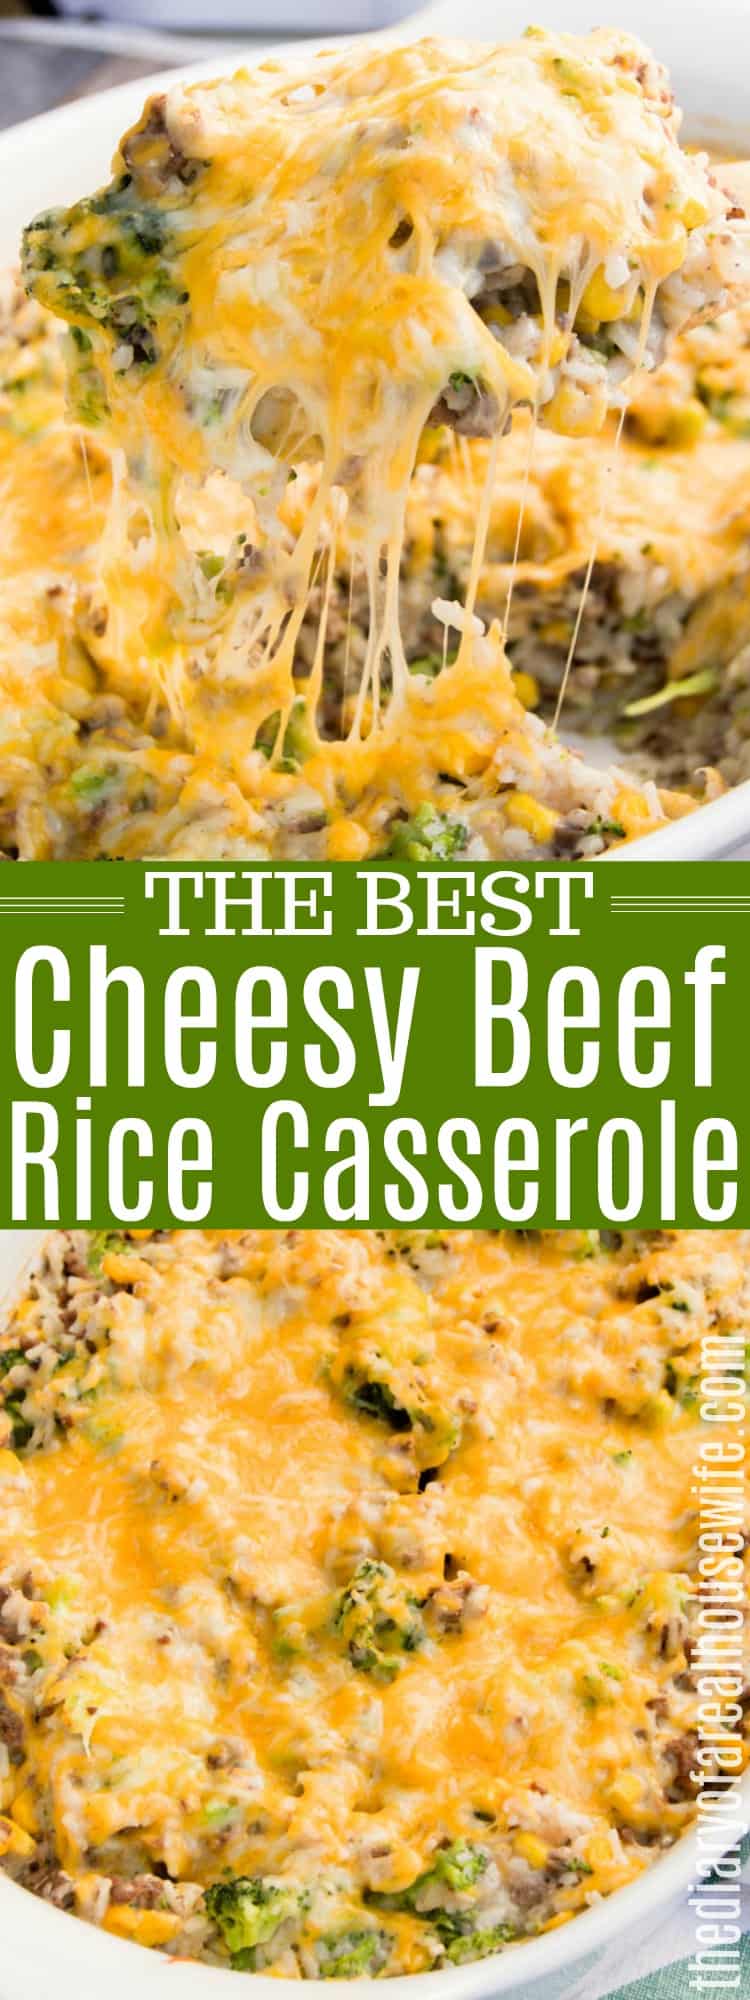 Beef And Rice Casserole The Diary Of A Real Housewife,What Is An Ionizer For Water